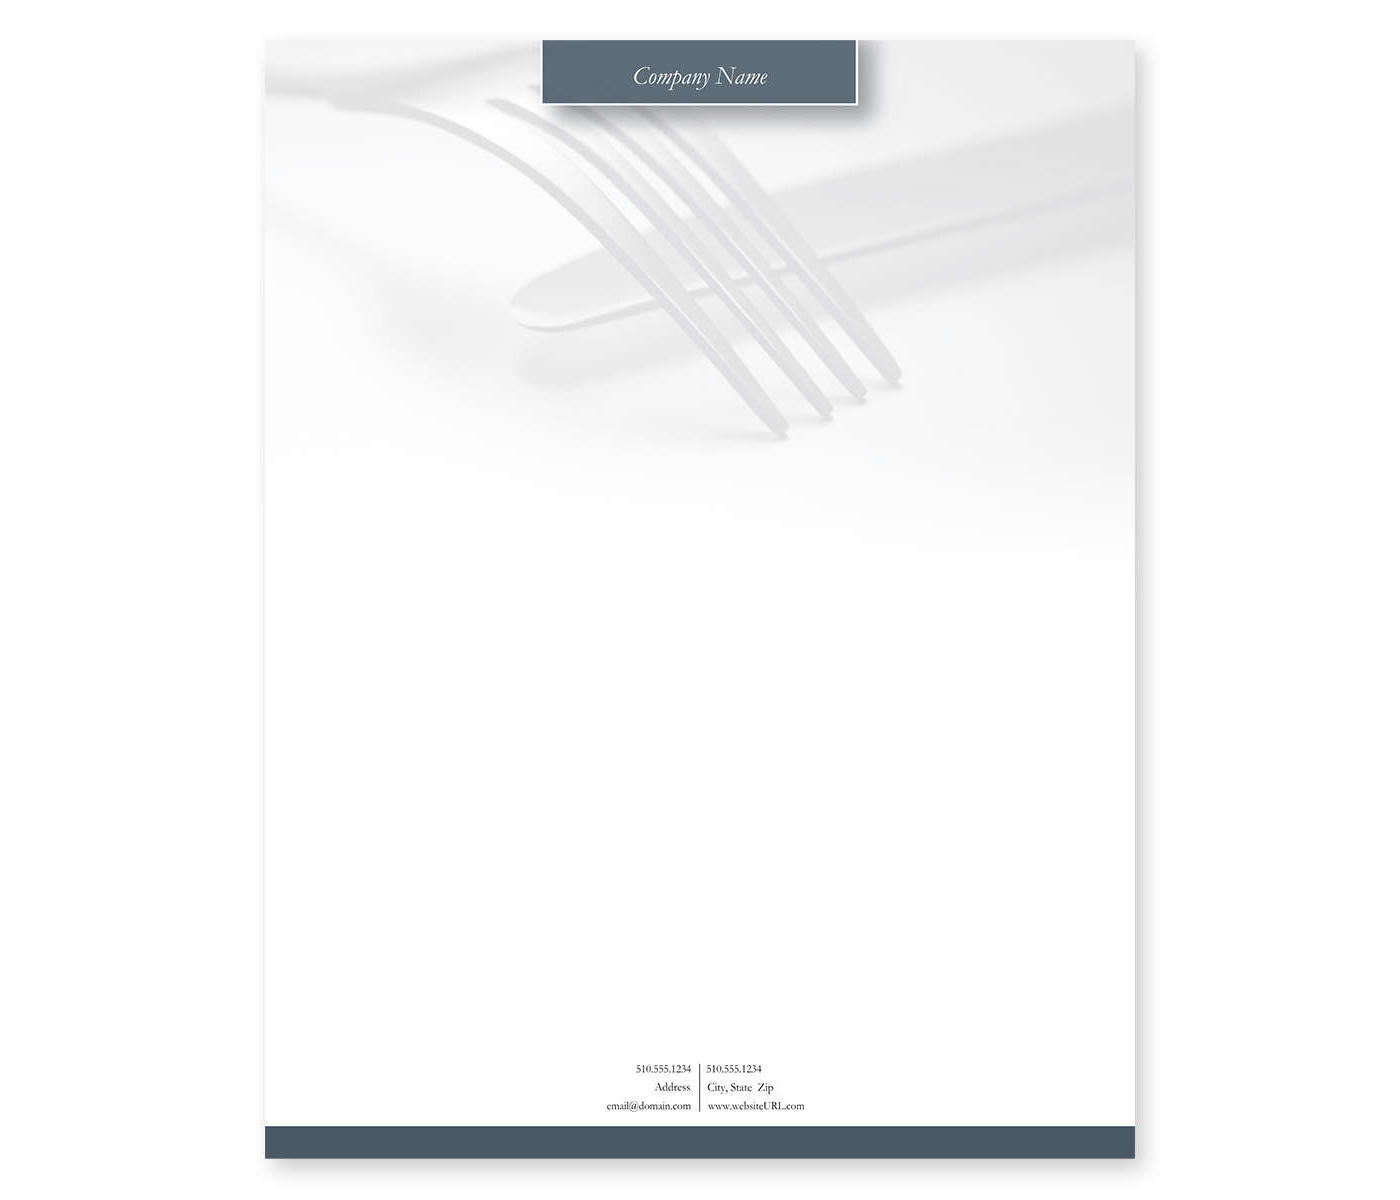 At Your Service Letterhead 8-1/2x11